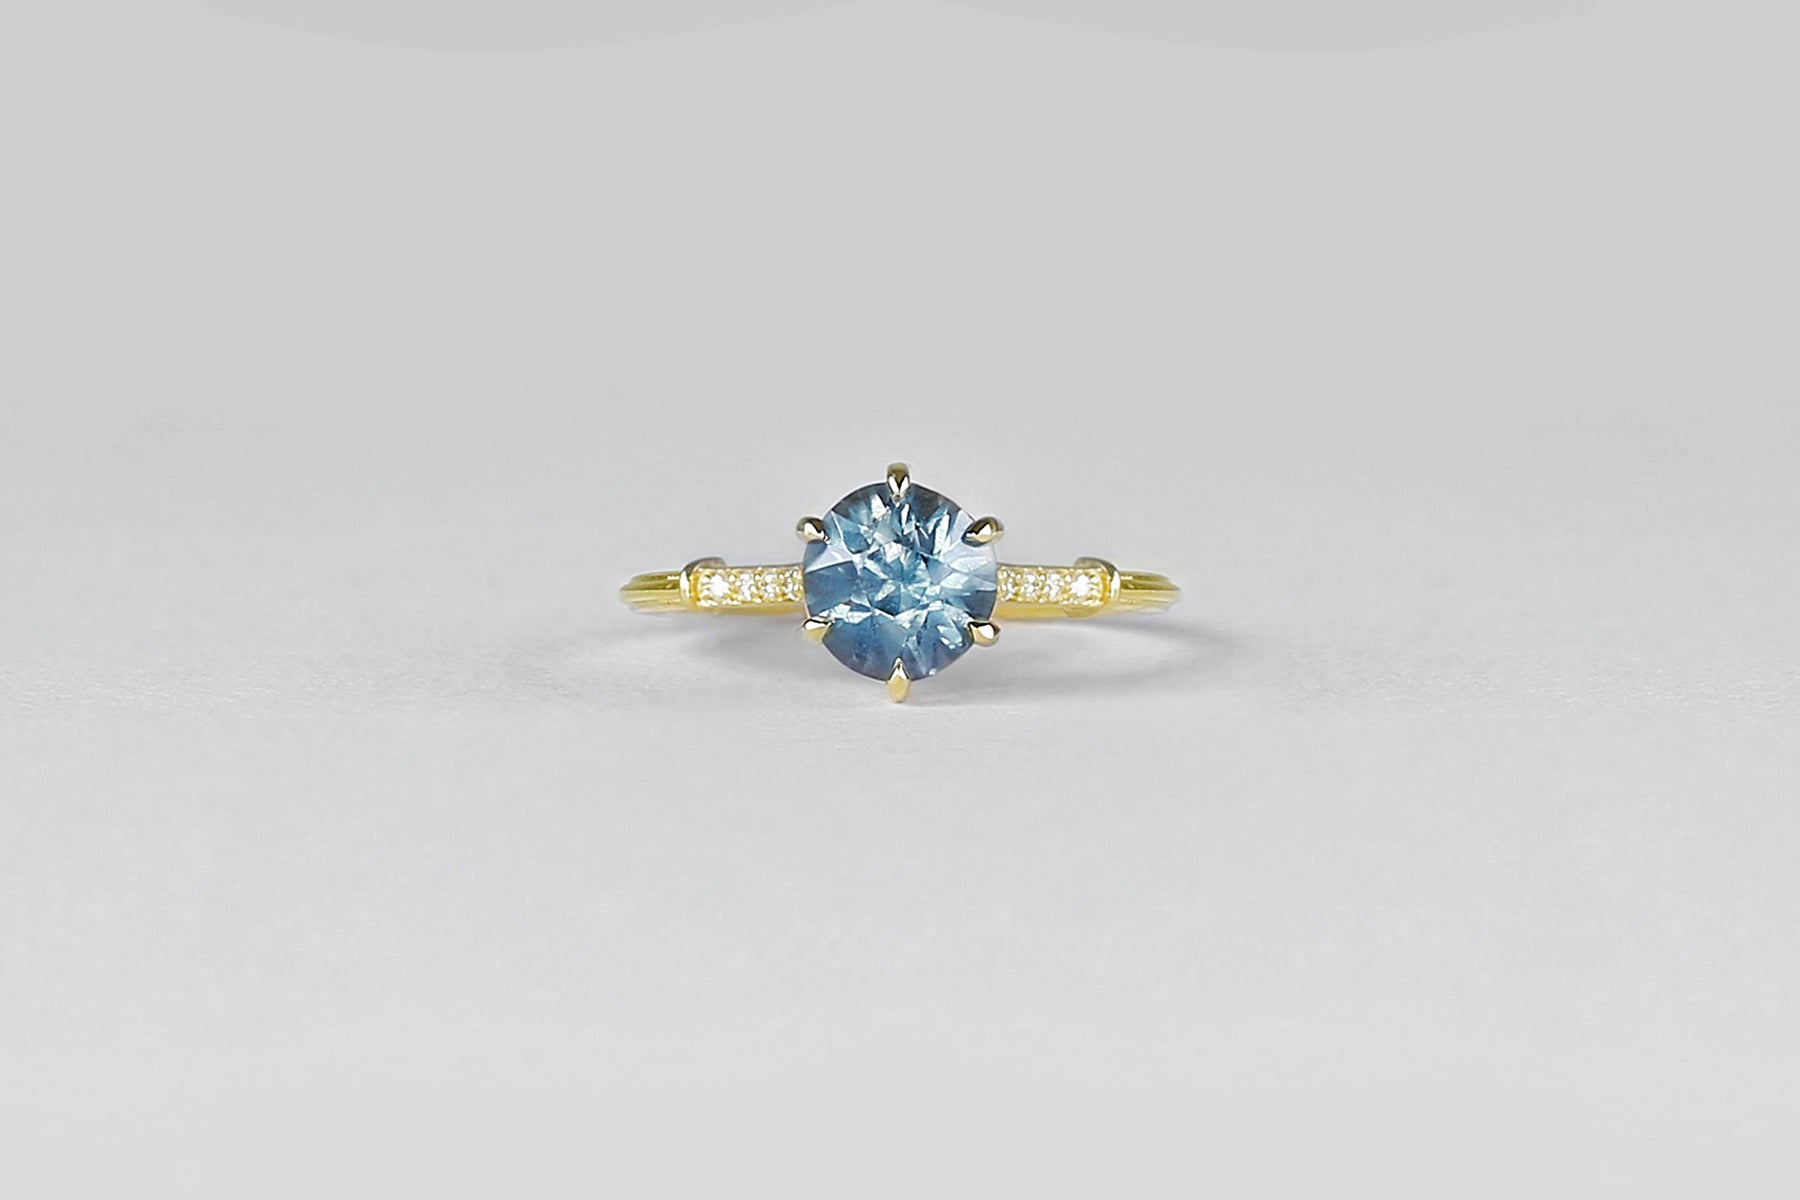 Glowing Untreated Montana Sapphire RIng - S. Kind & Co